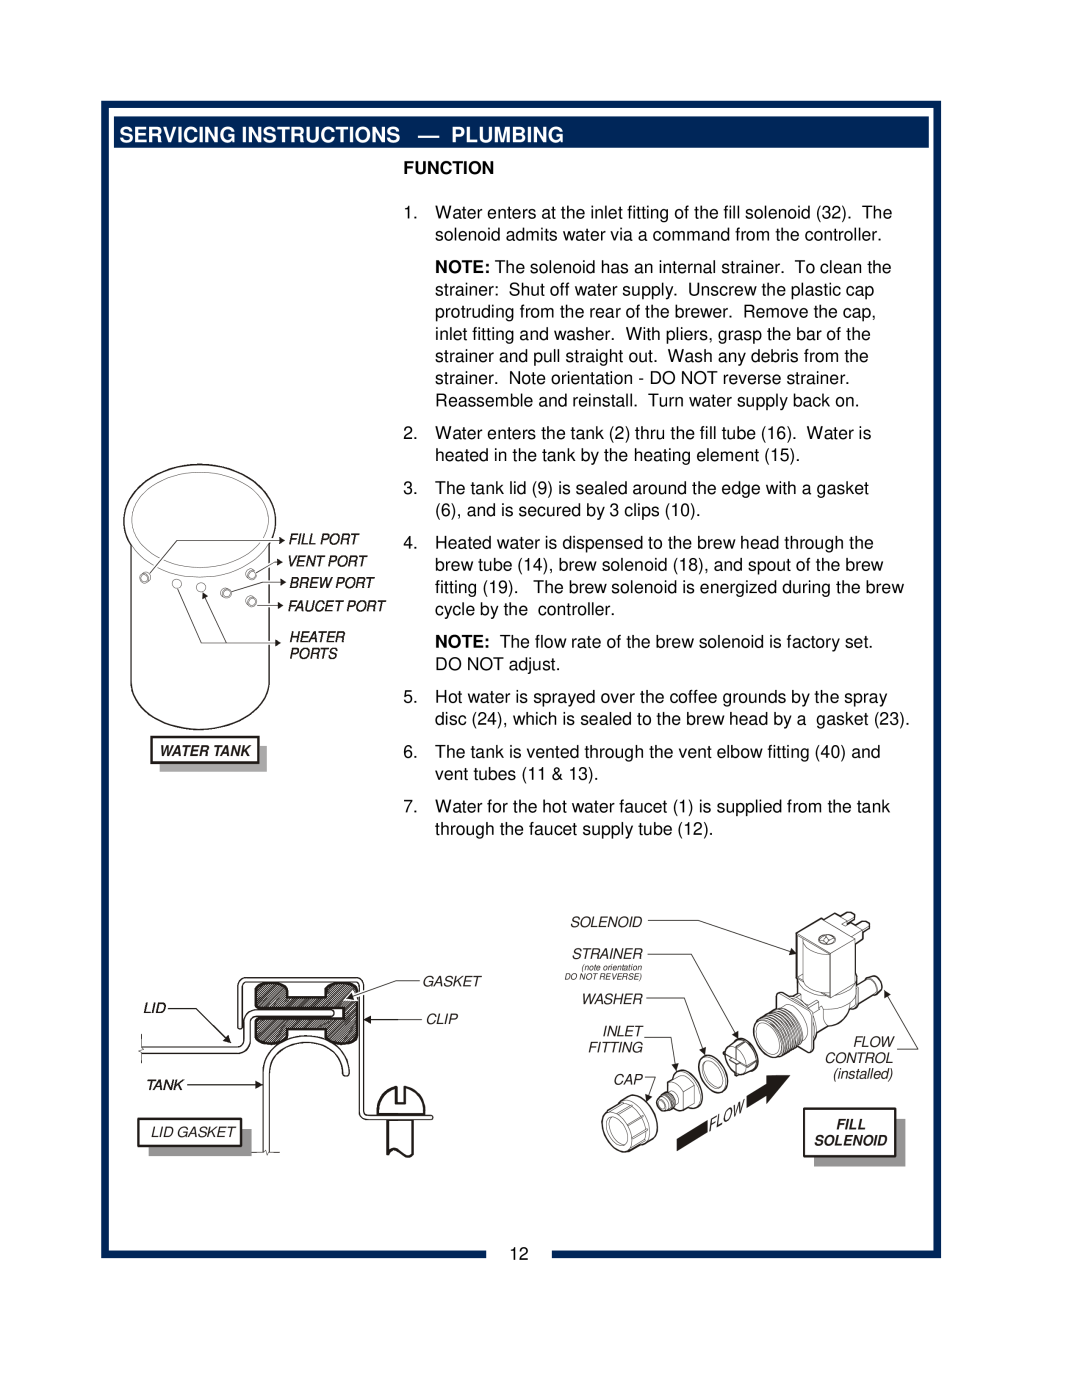 Bloomfield 2088EX, 2086EX, 2080, 2082 owner manual Servicing Instructions - Plumbing, Function 